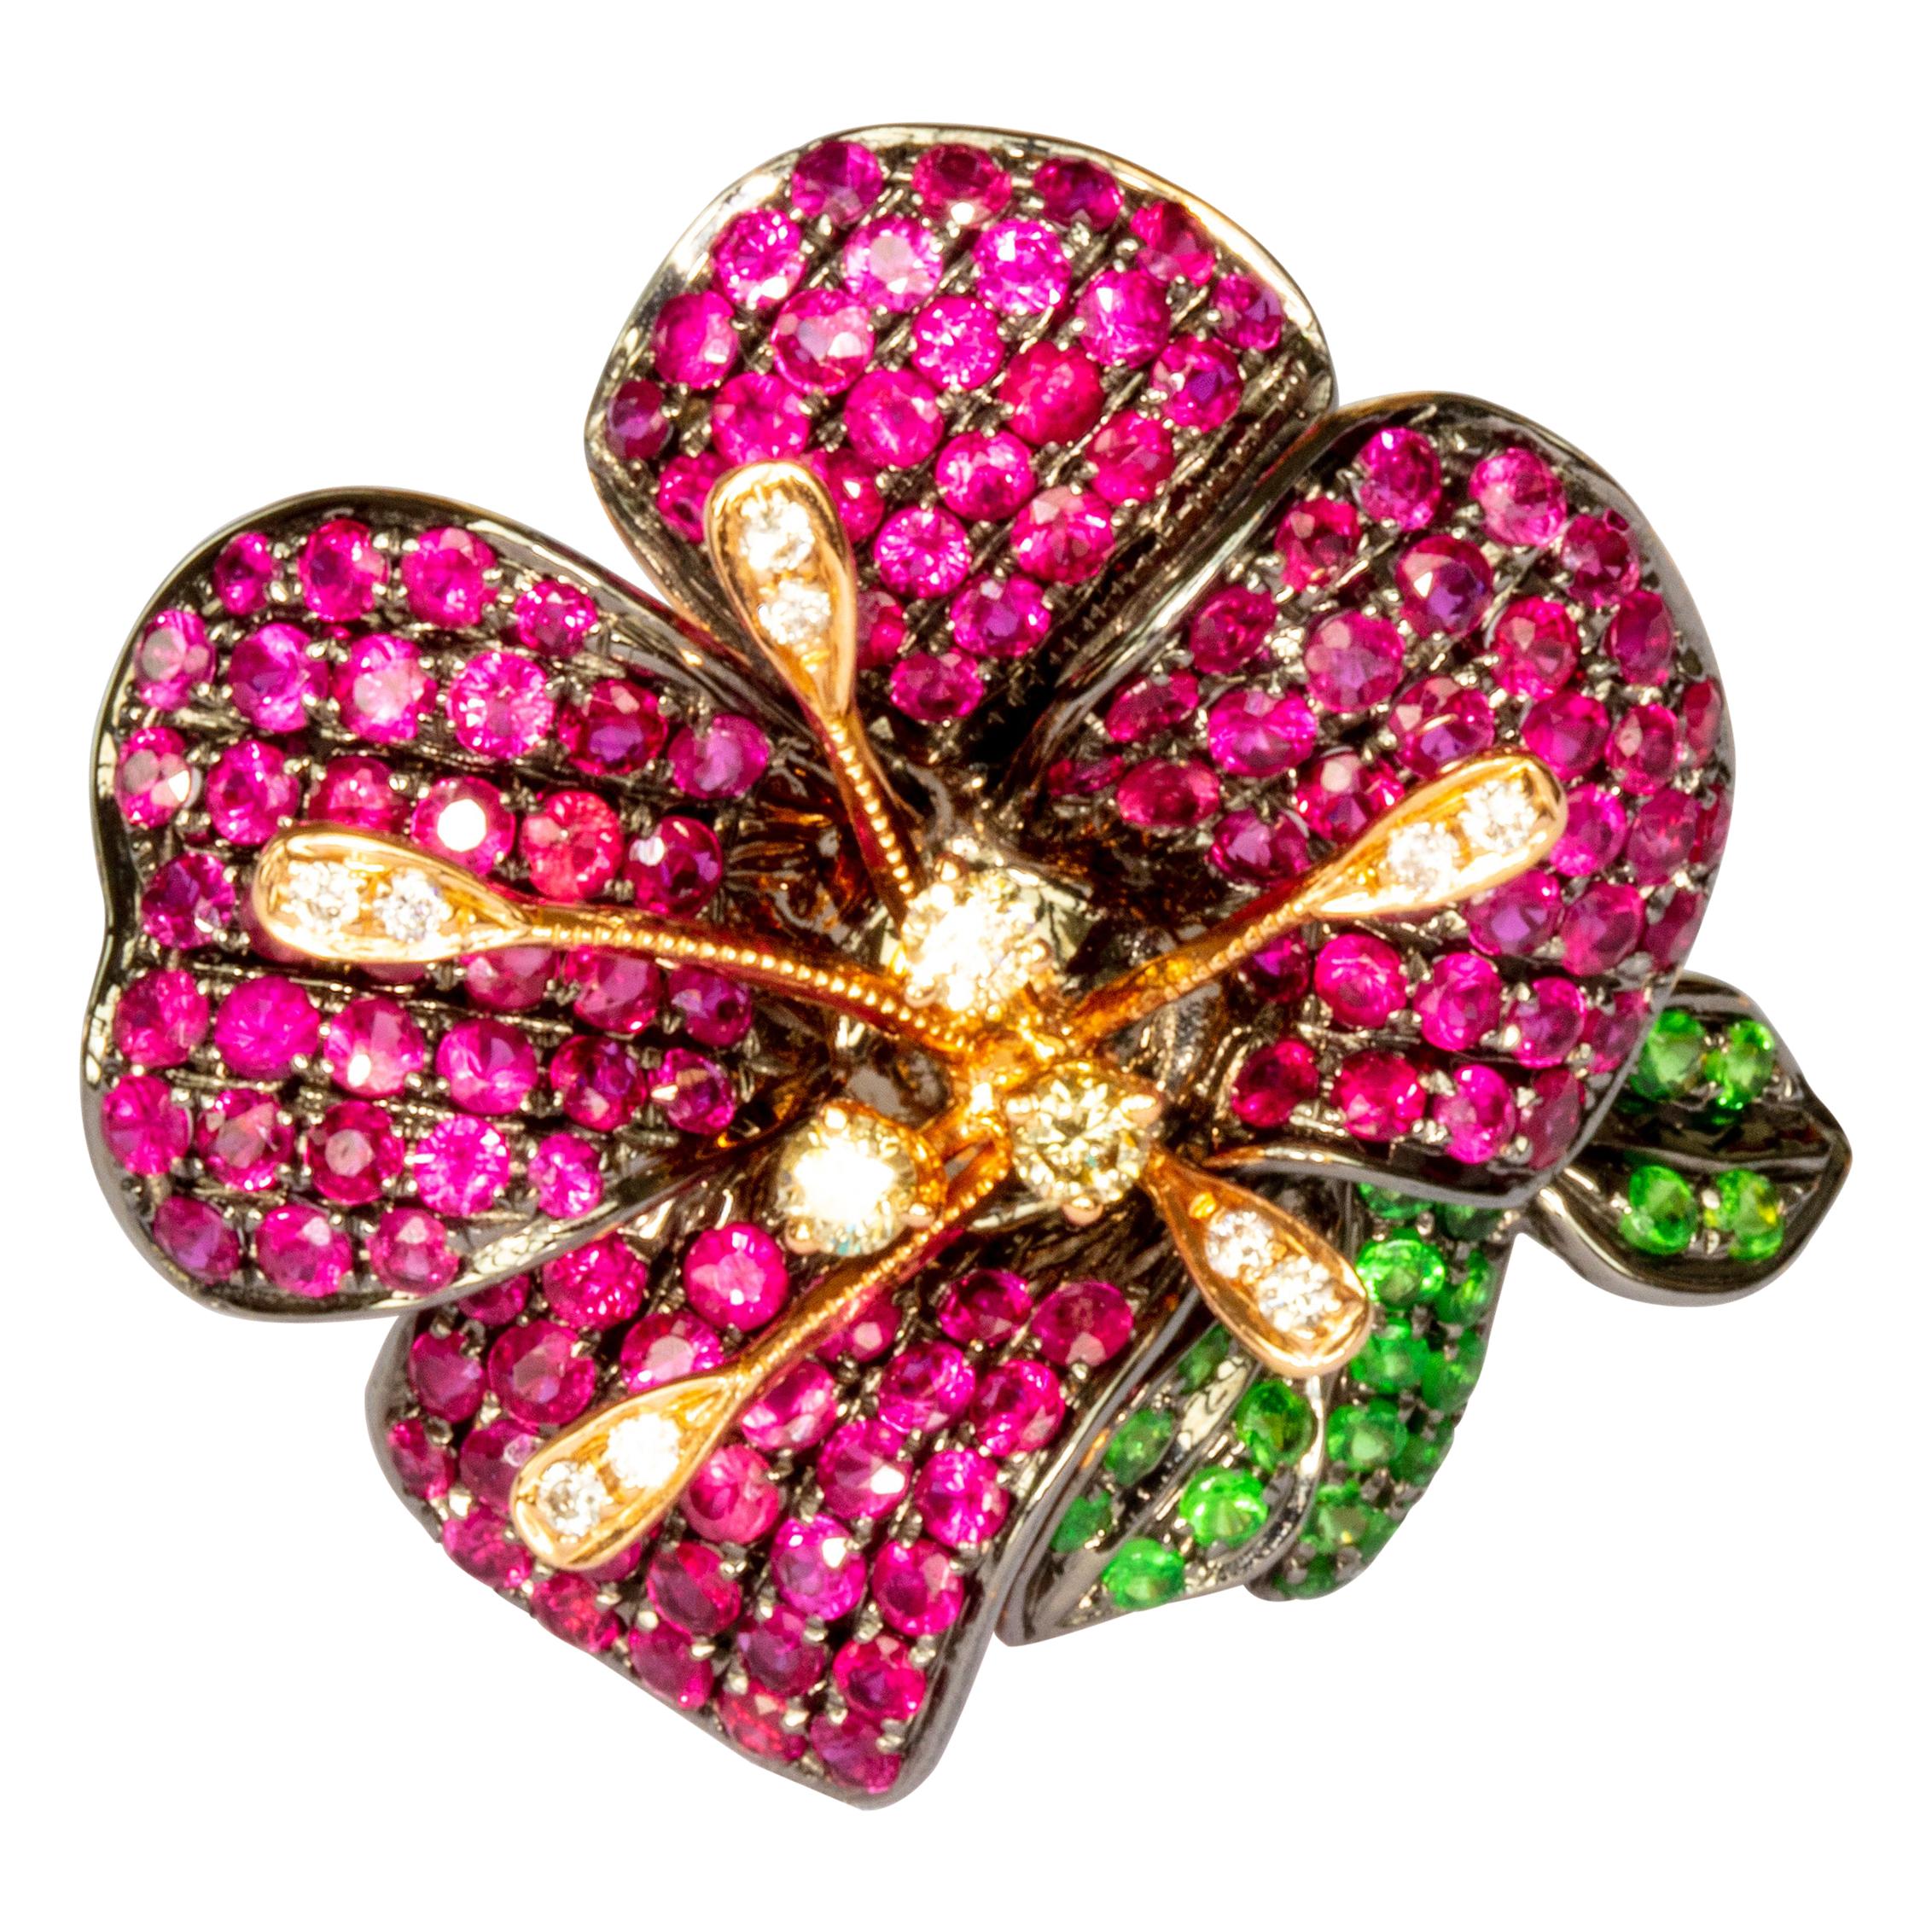 18k Ruby Flower Ring / Pendant 2 in 1 with Diamonds and Green Garnet Exquisite